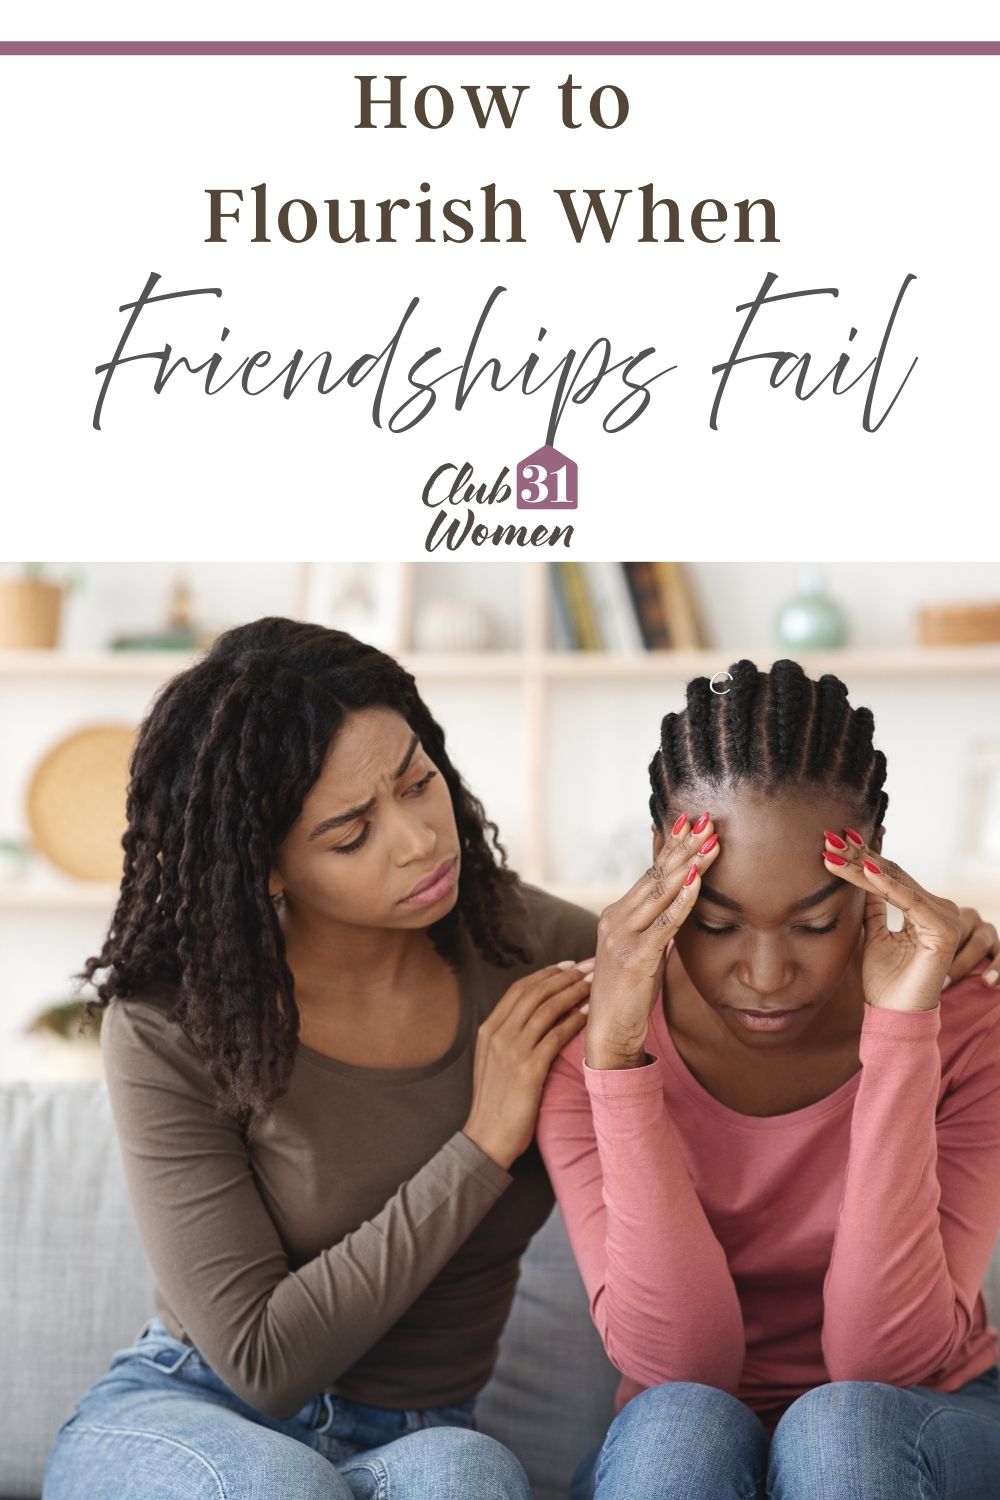 Friendships come and go and it can be hard to cope with those loses. How can we be satisfied through our deepest aches? via @Club31Women